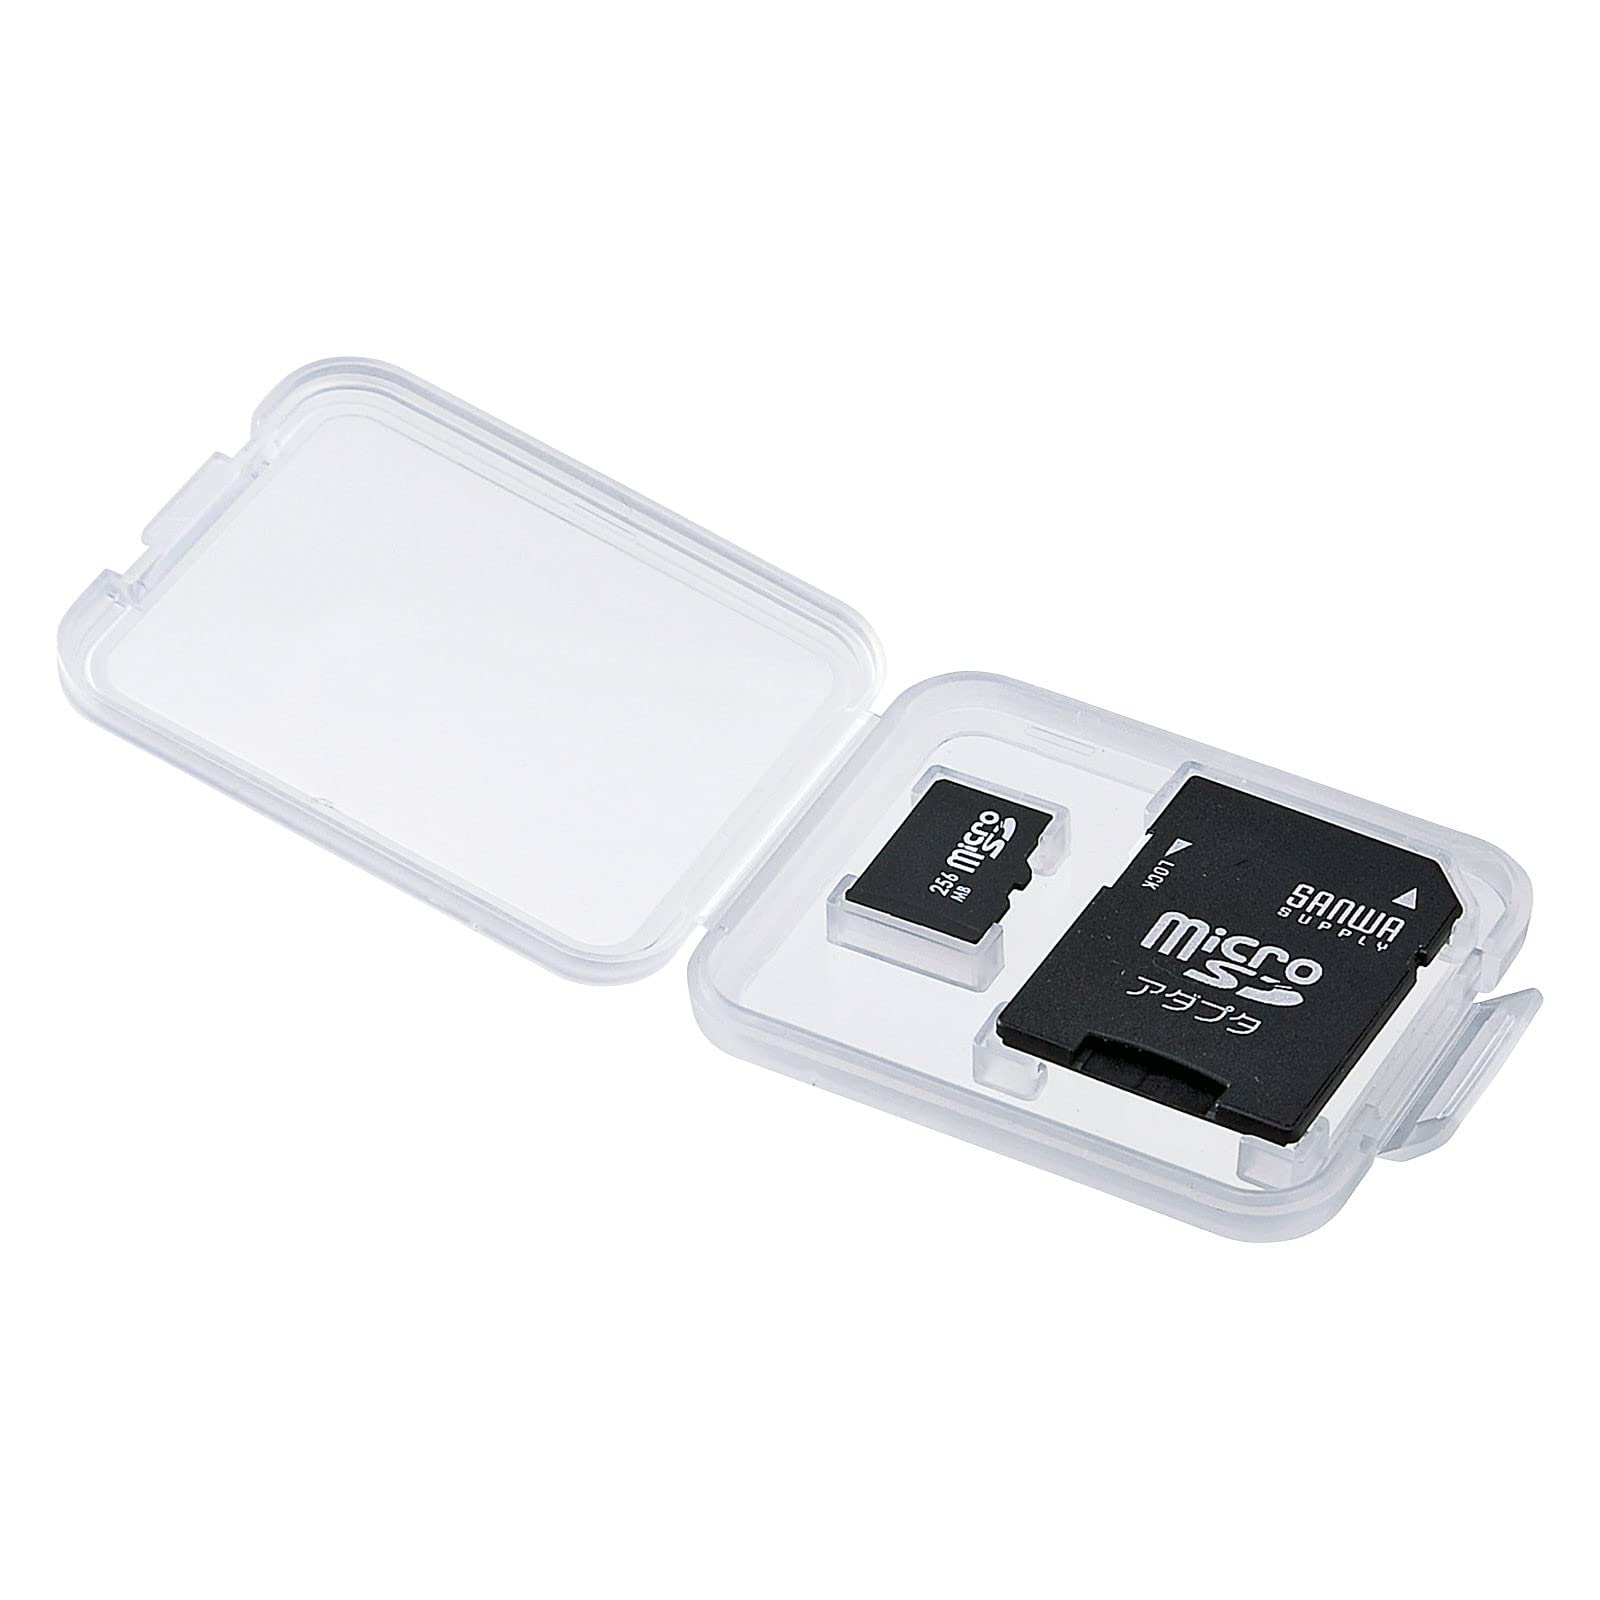 sd card in a protective case